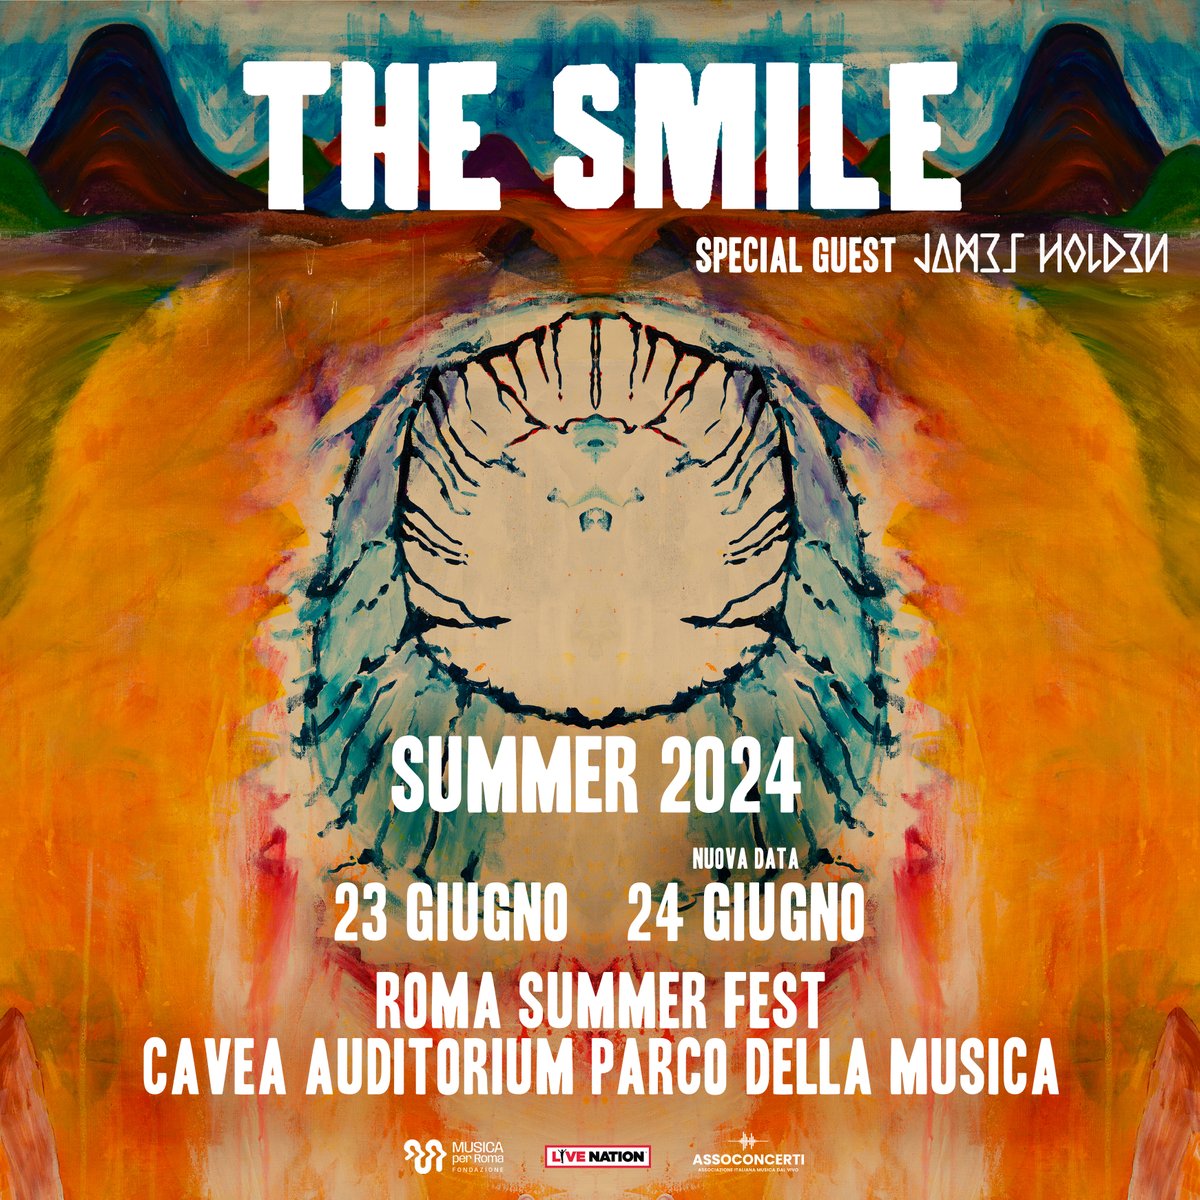 The Smile will play a second show at Roma Summer Fest at Cavea Auditorium on 24th June. Tickets on sale now: wasteheadquarters.com/schedule/the-s…